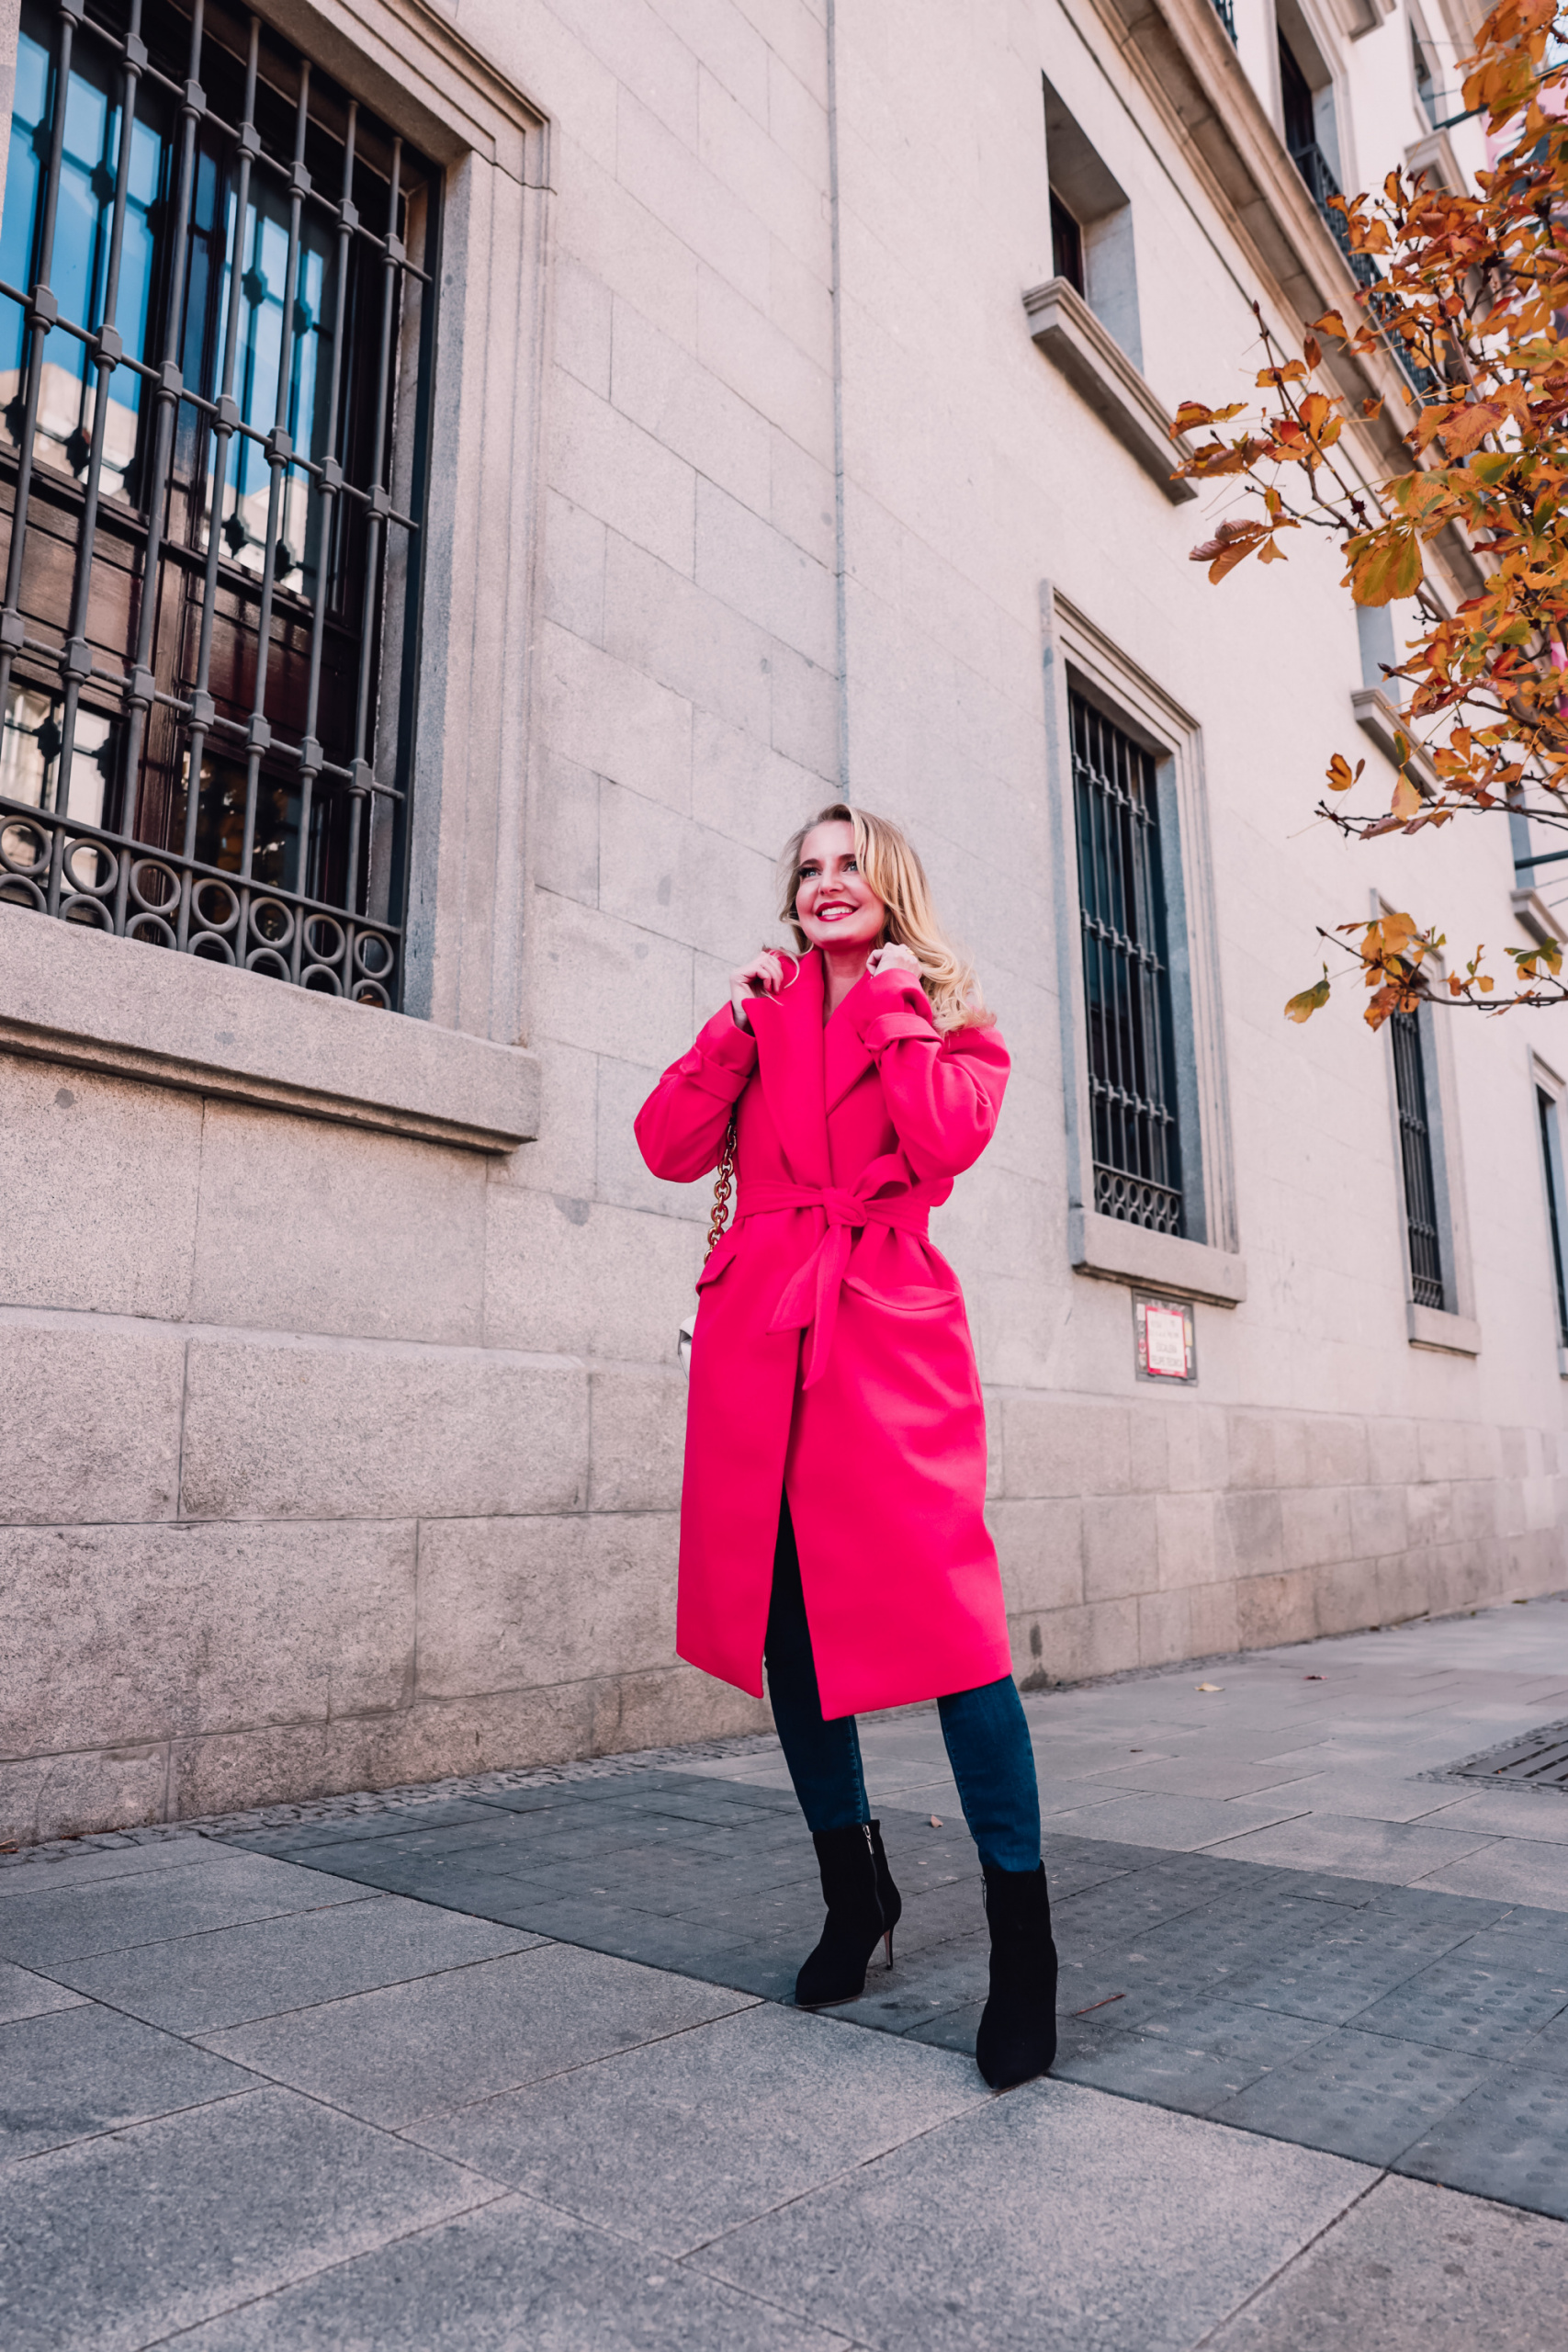 statement coat, how to wear statement coat, how to style statement coat, statement pieces, how to wear statement pieces, how to style statement pieces, erin busbee, madrid, spain, express hot pink wrap coat, express high waist skinny jeans, express black booties, express white bodysuit